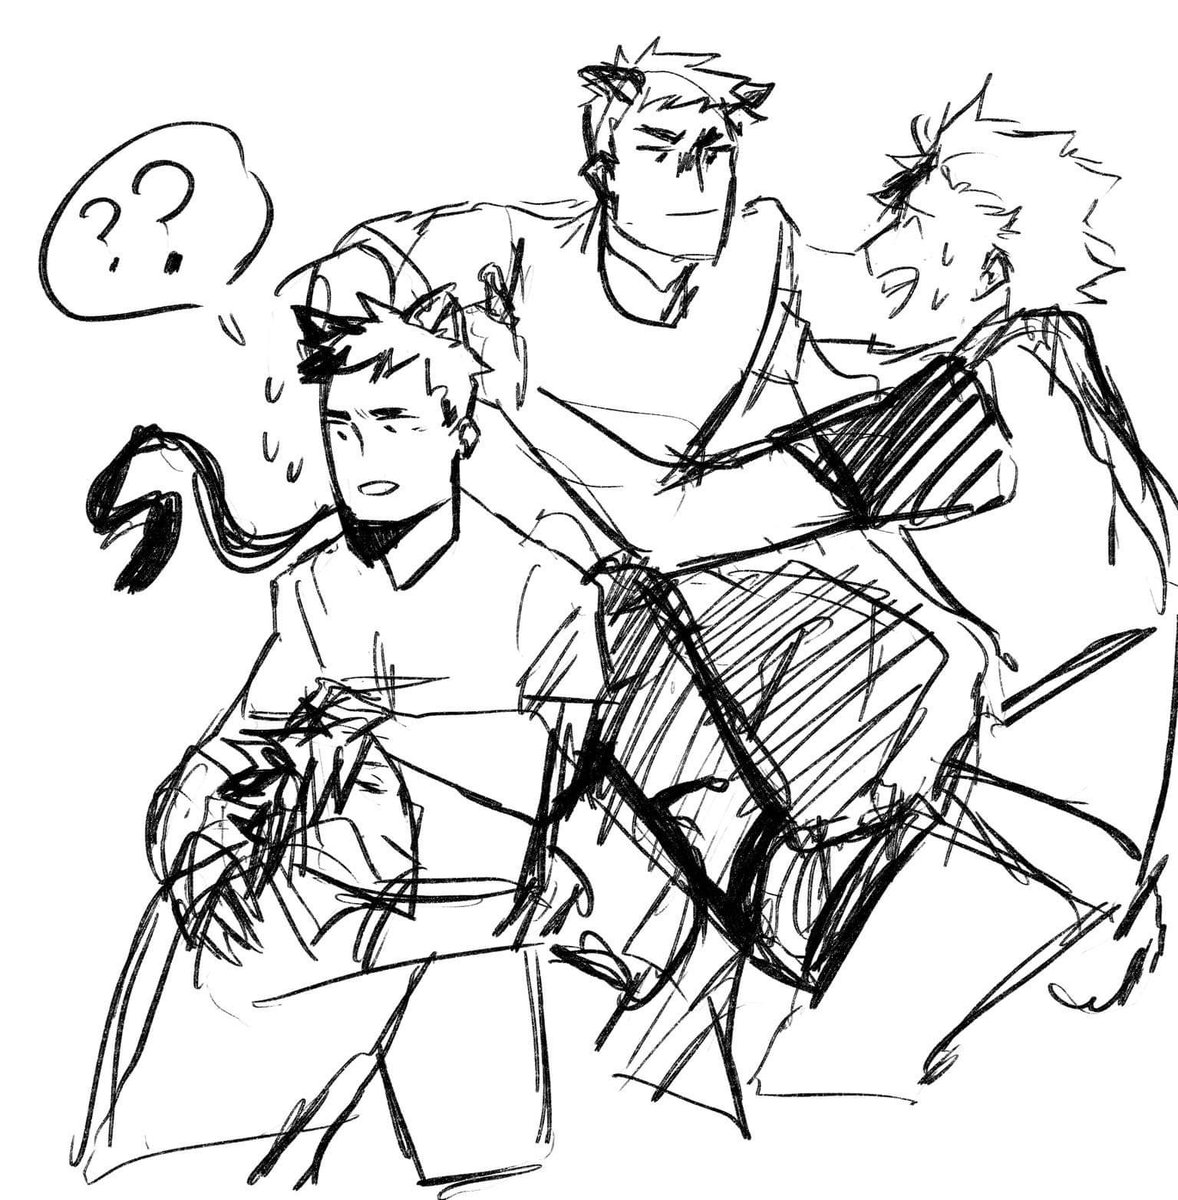 #kurodai doodles with Catboy Daichi who doesn't act like a cat and Kuroo the human who acts like the cat 